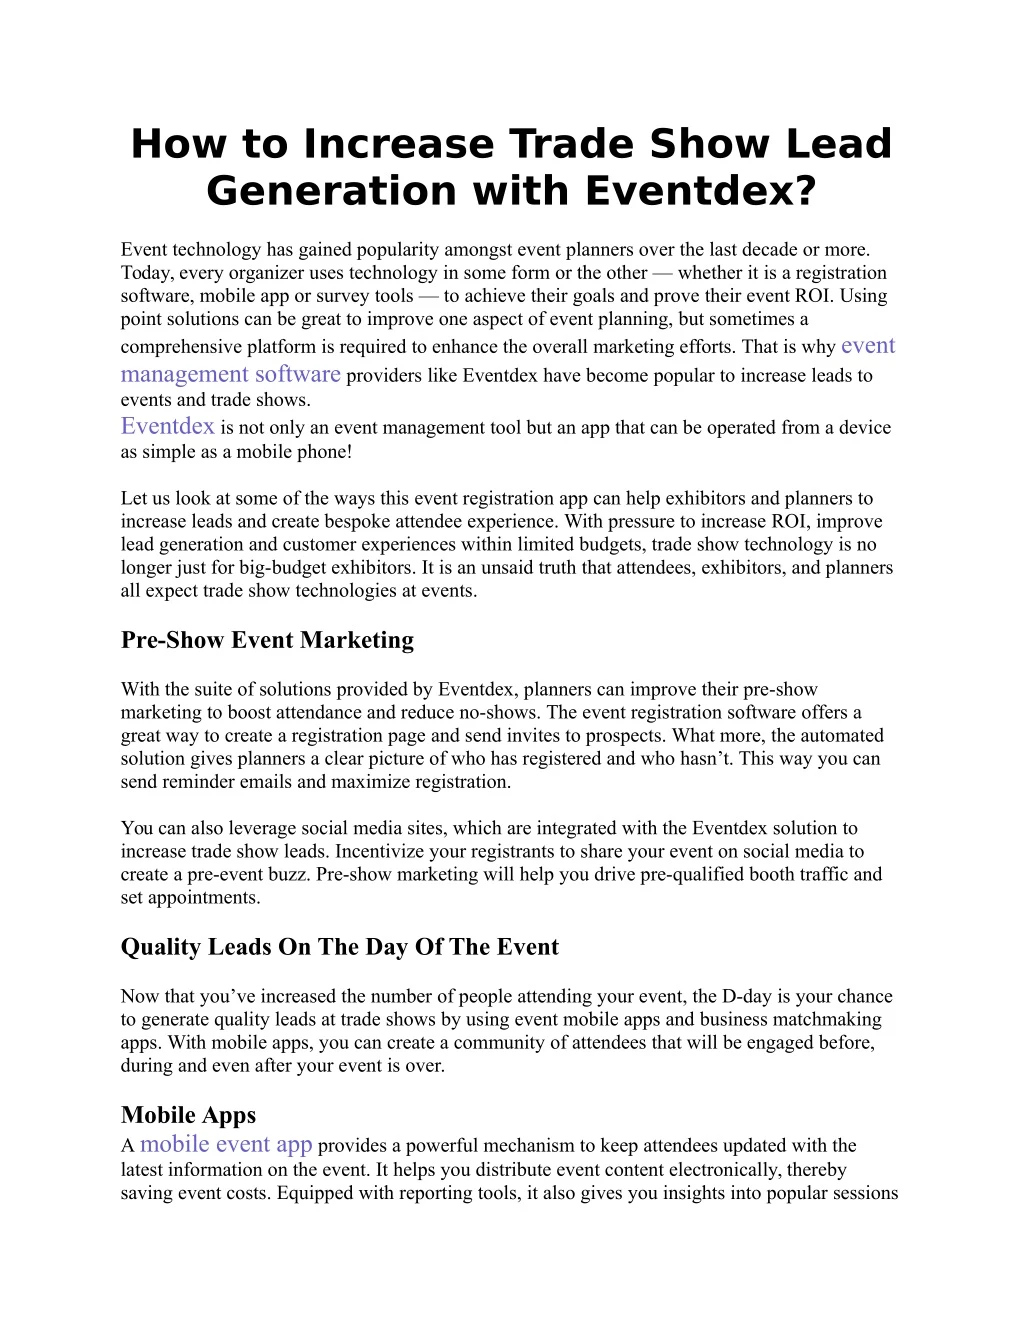 how to increase trade show lead generation with